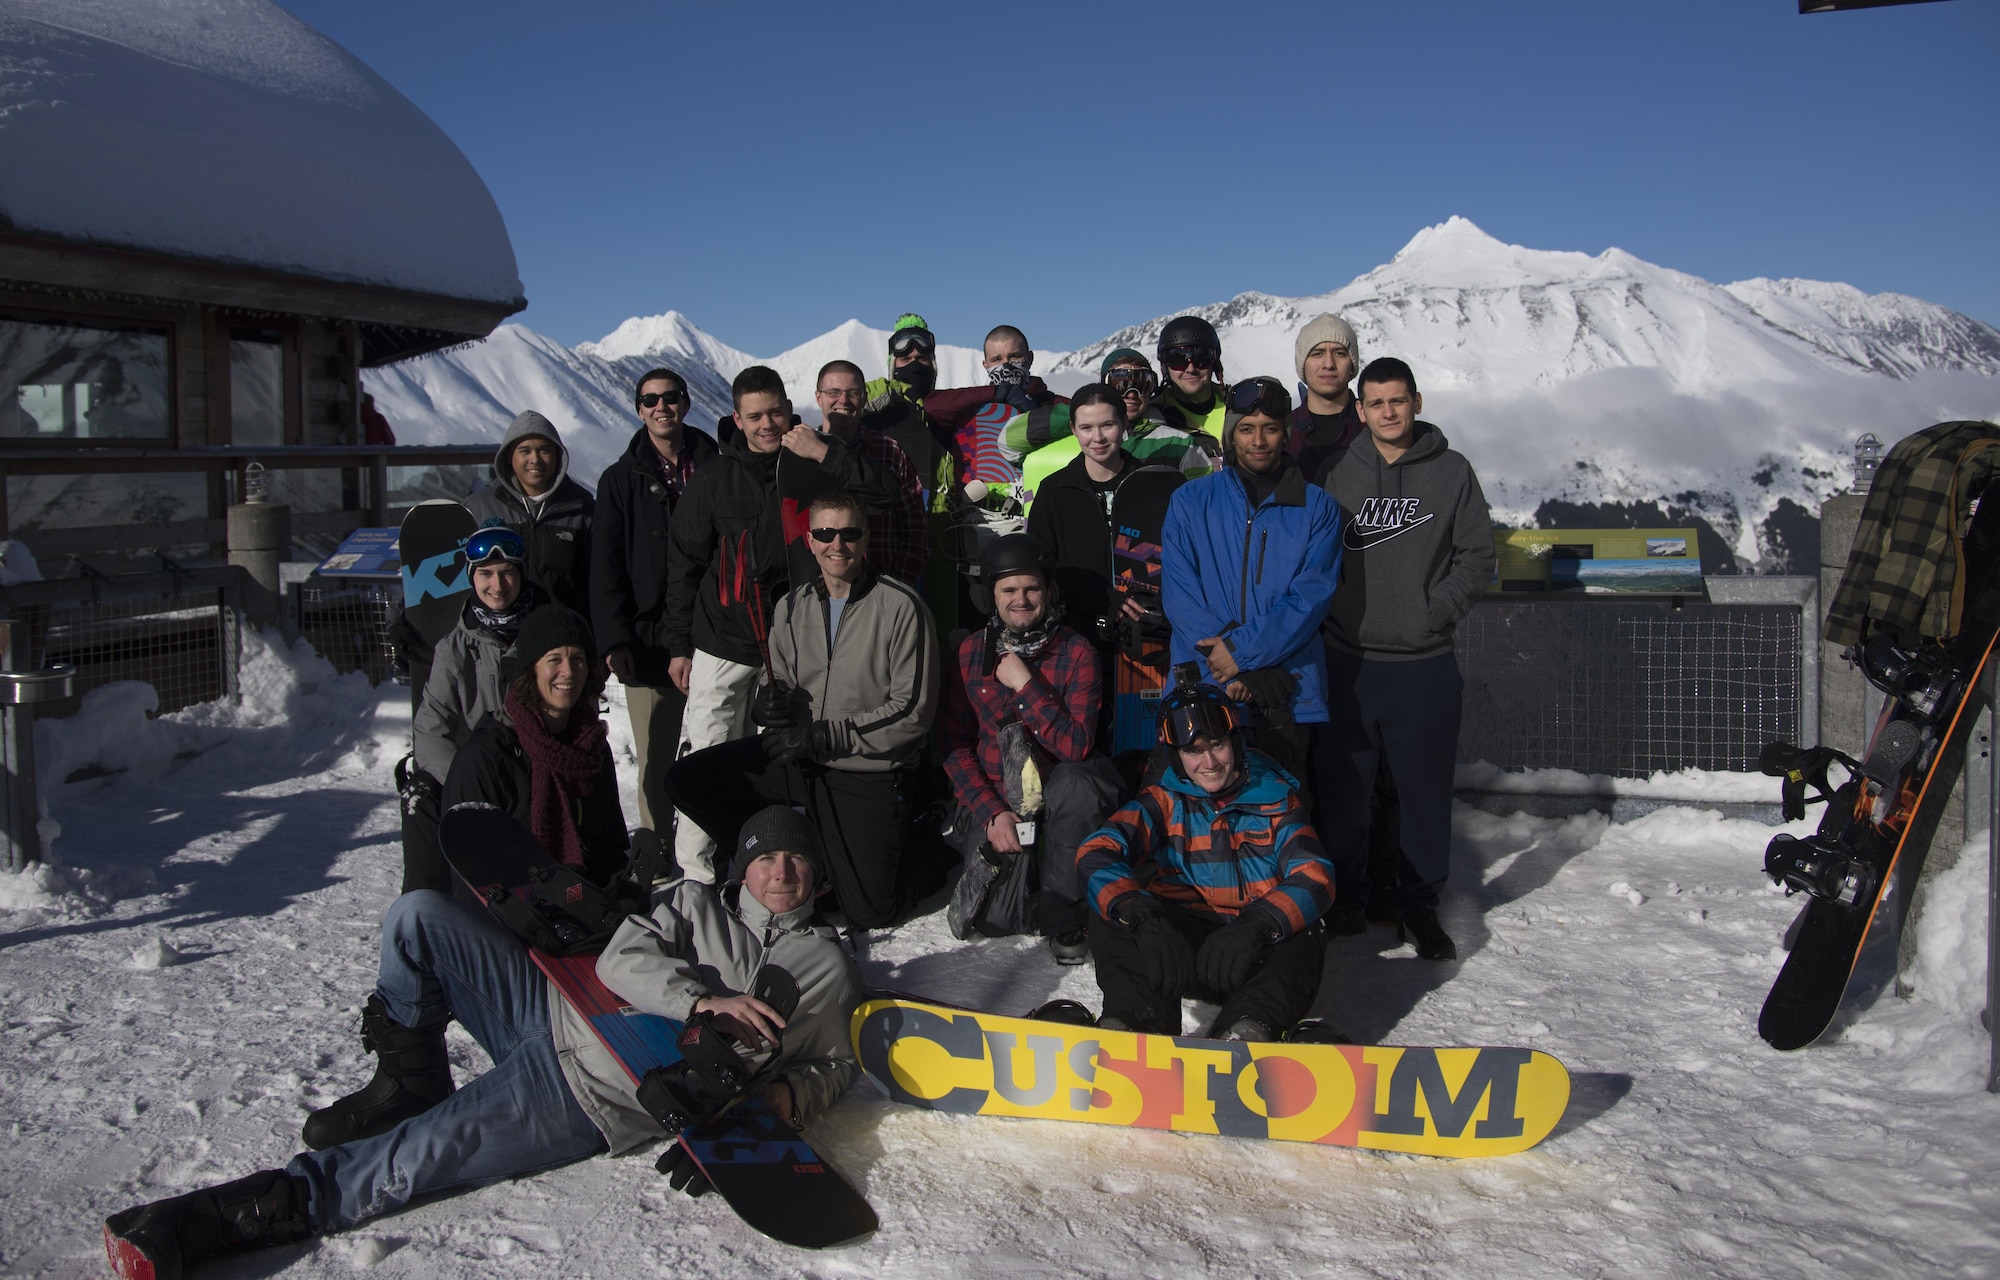 Airmen from Eielson Air Force Base, Alaska, pose at the top of Alyeska Ski Resort March 3, 2016, Girdwood, Alaska. The group visited the resort as part of a chapel-sponsored event. (U.S. Air Force photo by Senior Airman Joshua Weaver/Released)